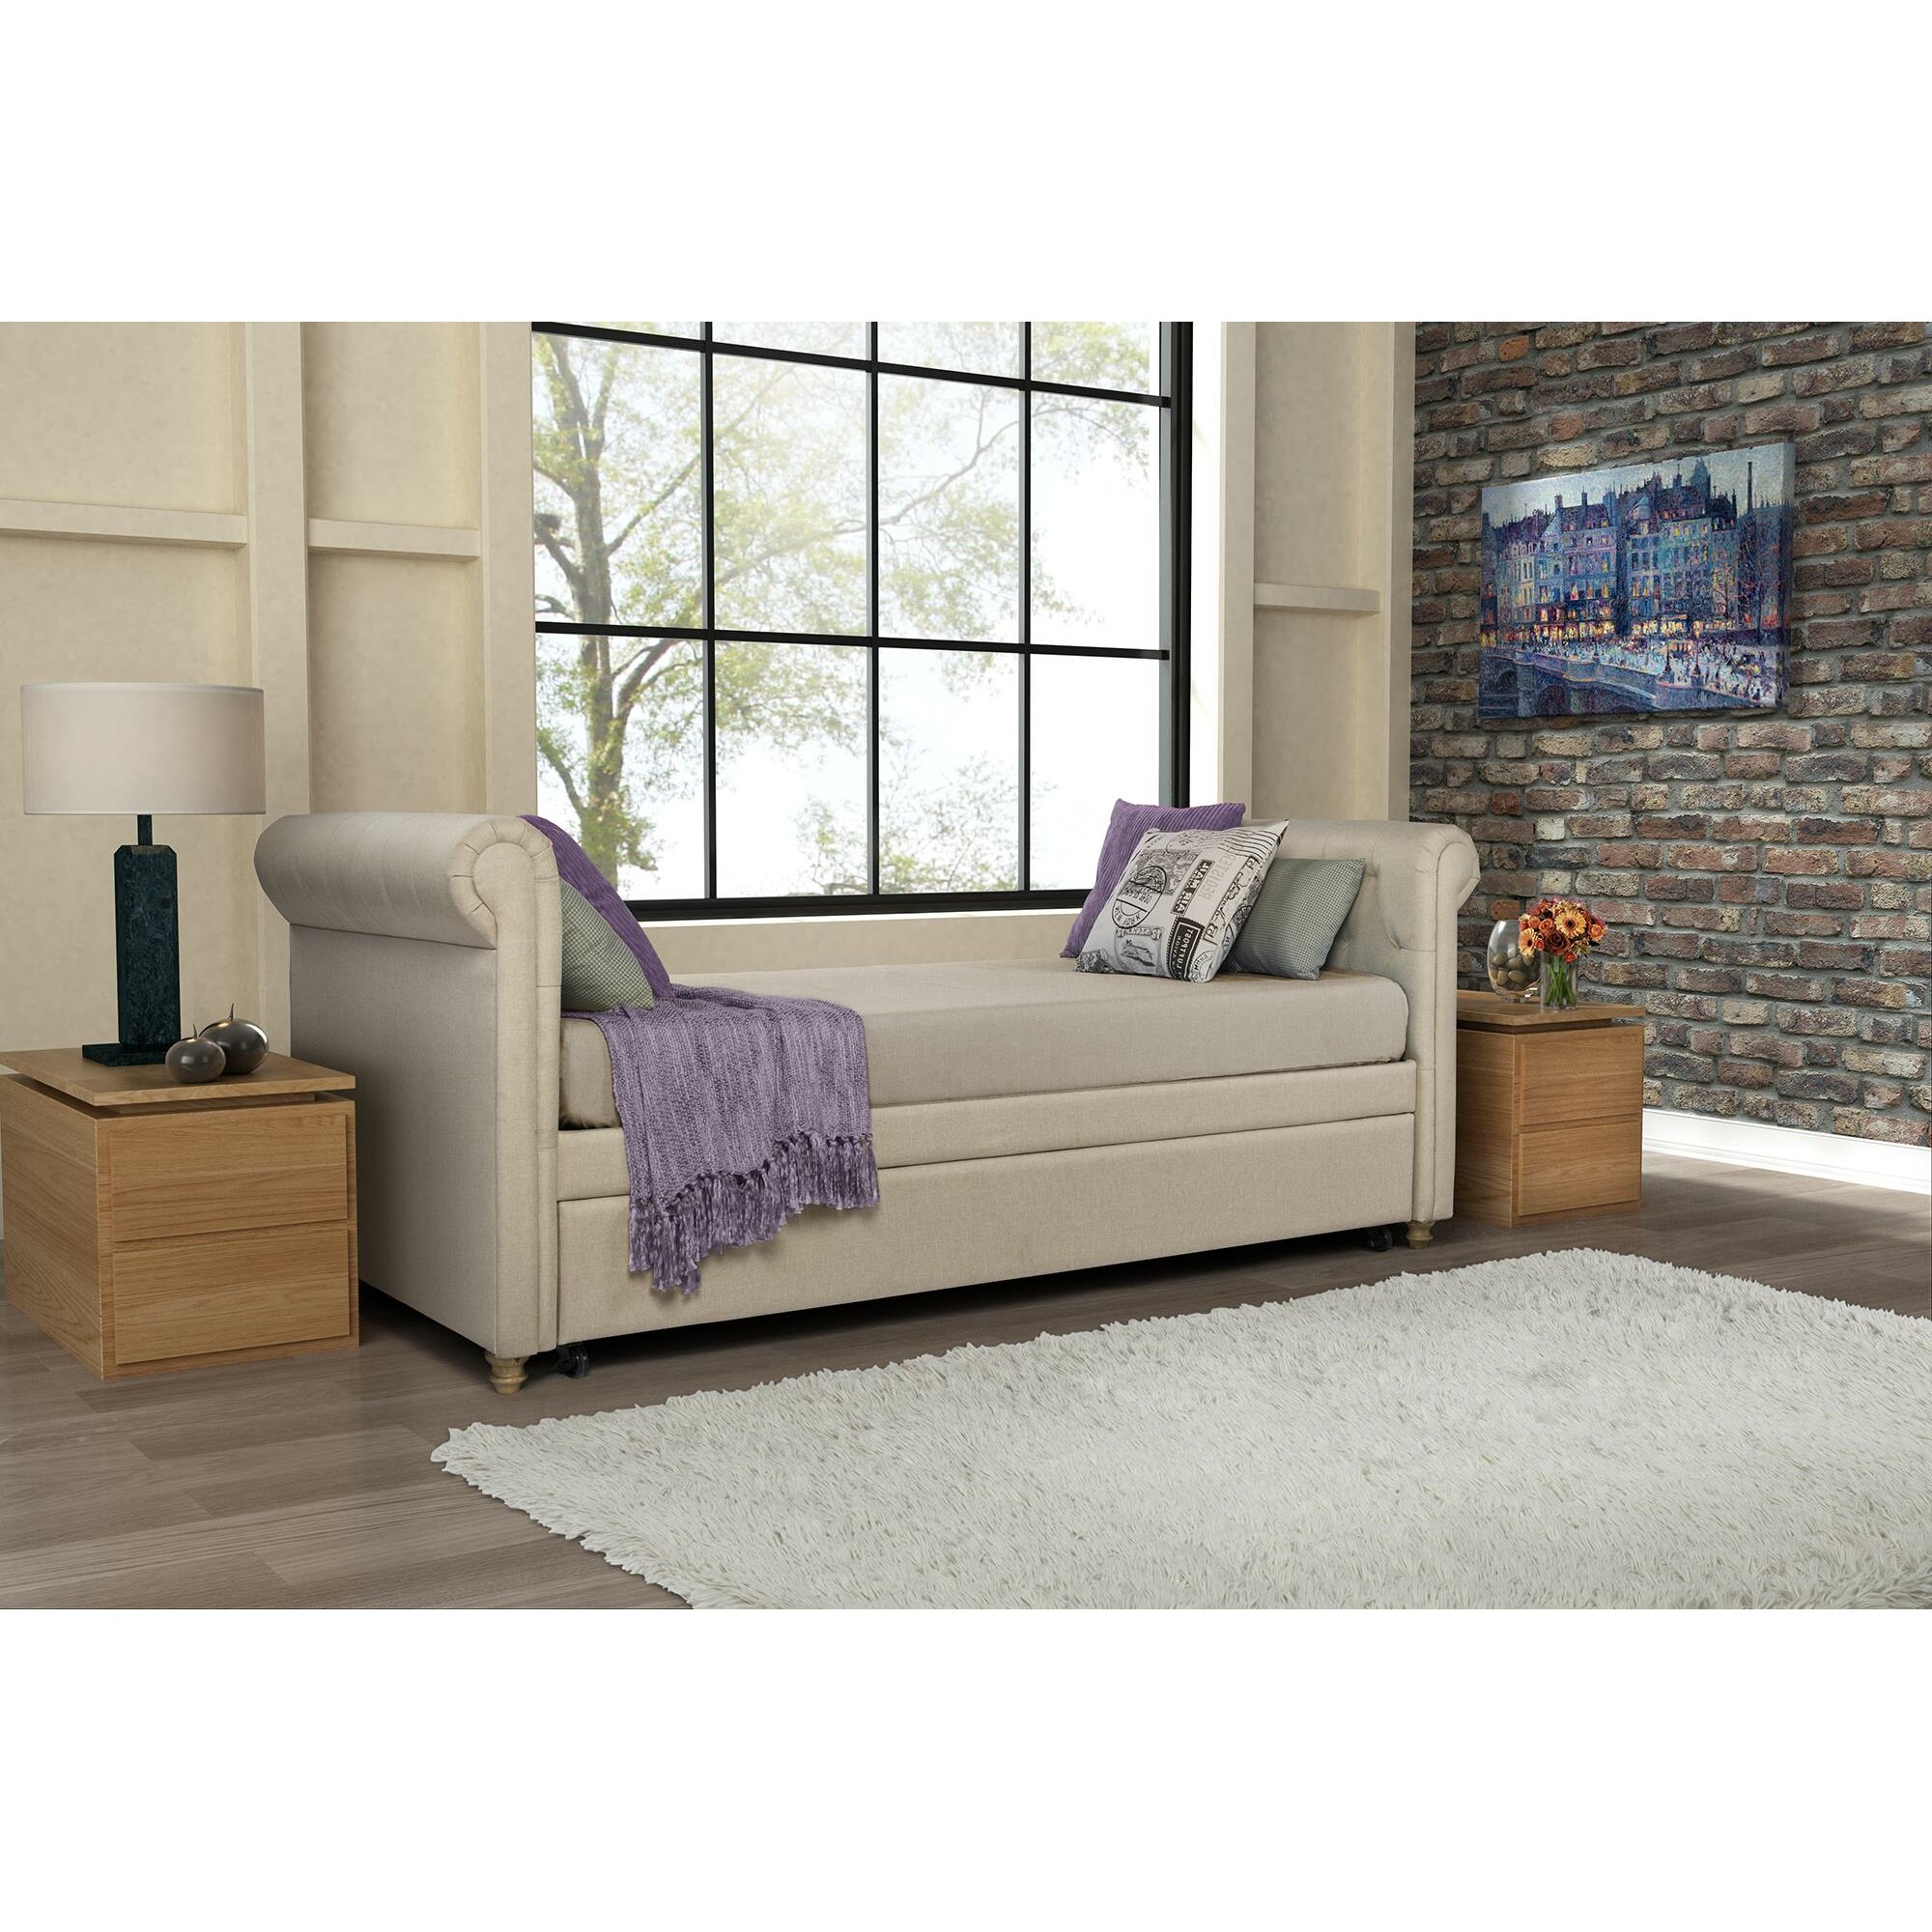 DHP Sophia Daybed with Trundle  Reviews Wayfair